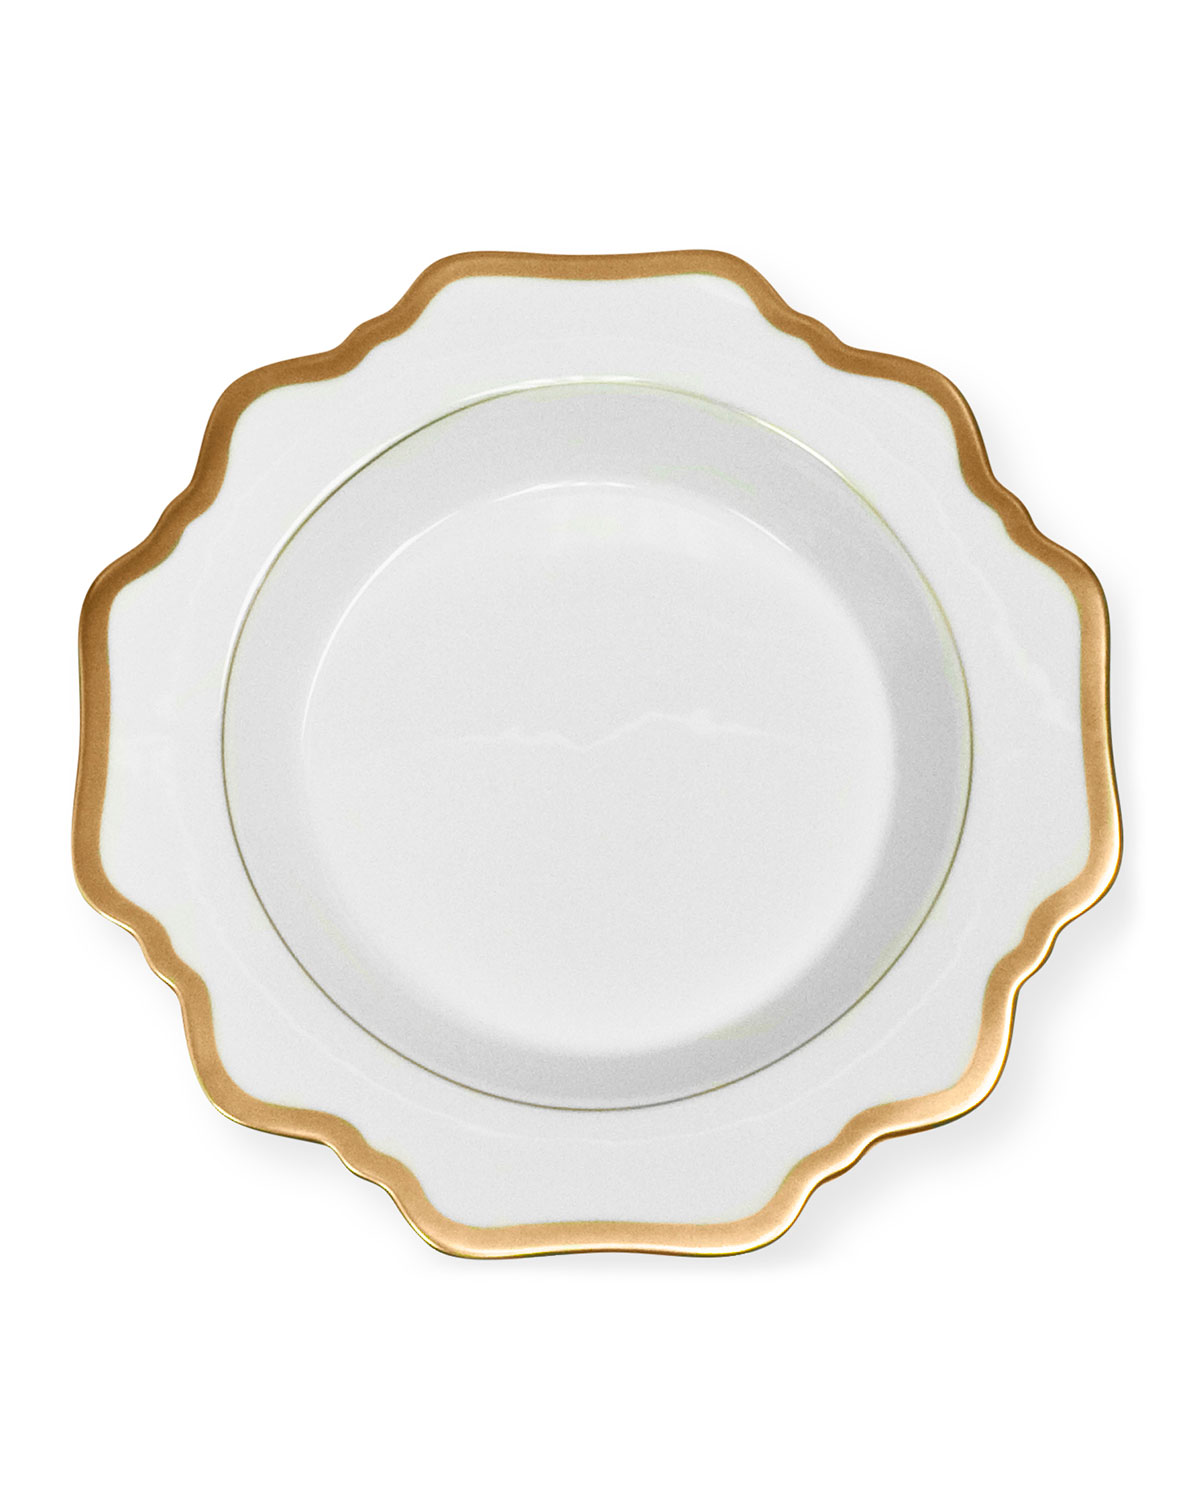 ANNA WEATHERLEY ANTIQUED WHITE SOUP PLATE,PROD153570638